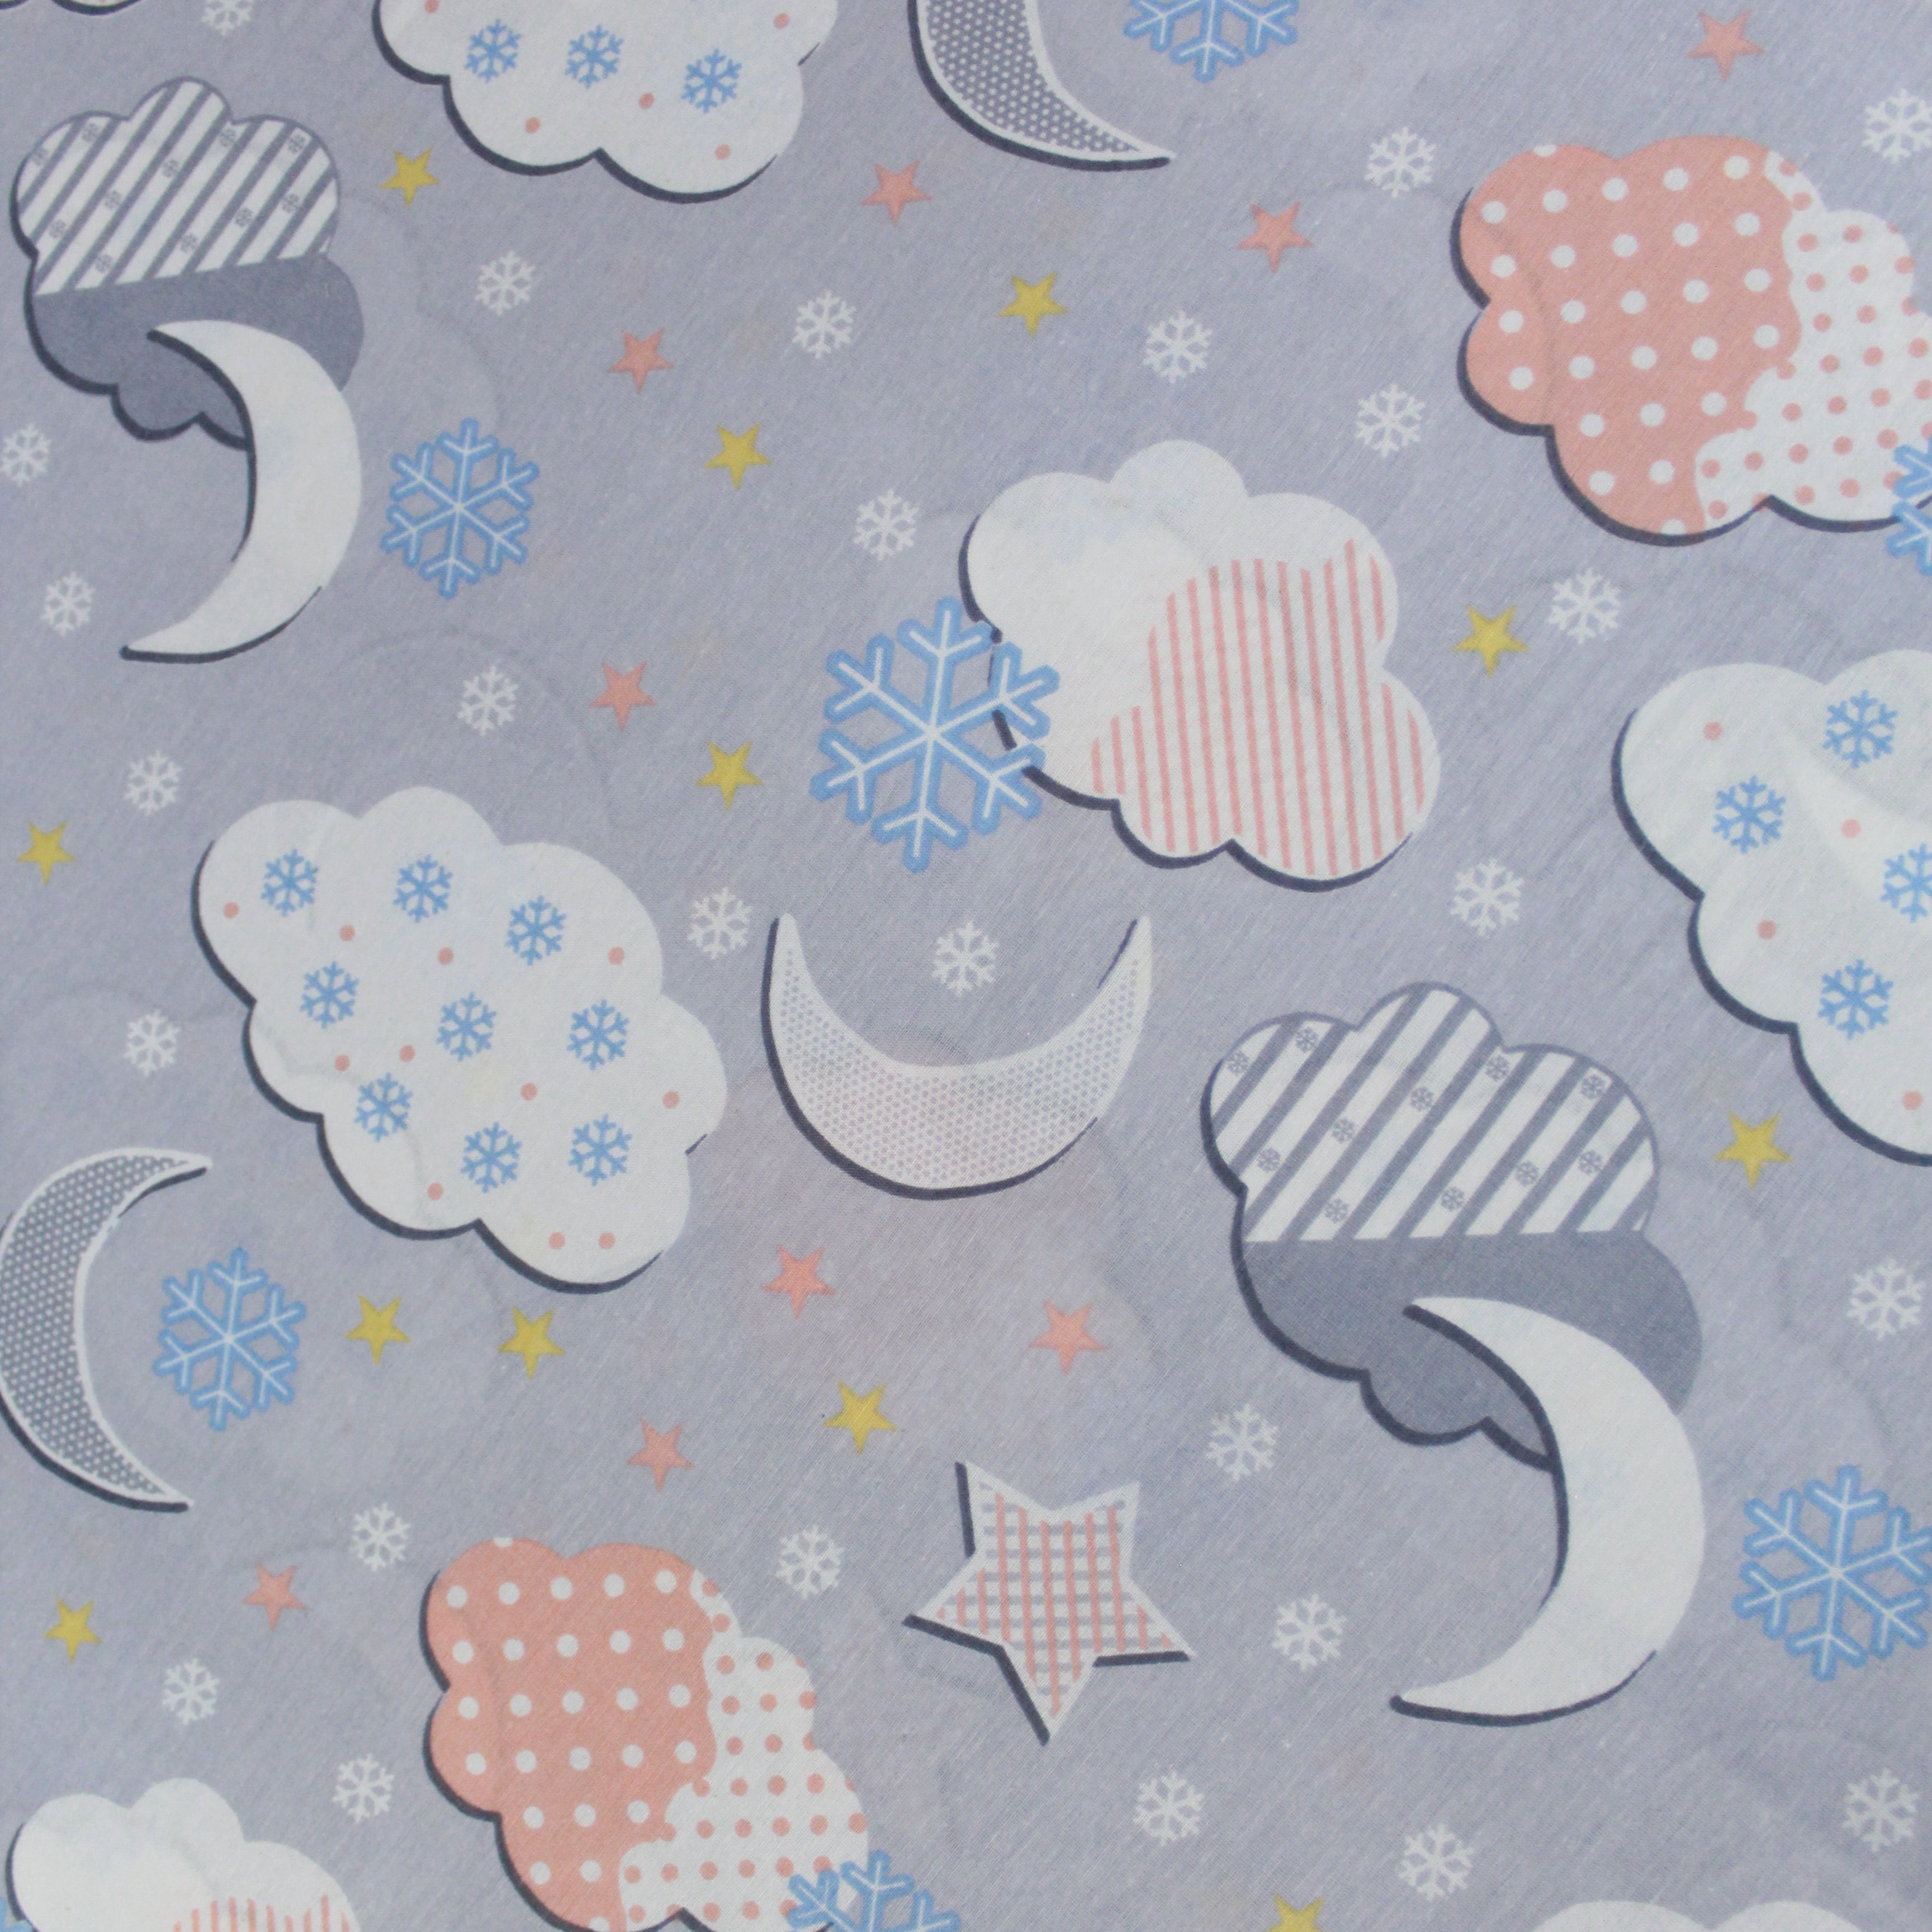 Premium Quality Super Wide Cotton Blend Sheeting “Stars In The Clouds" 94" Wide Light Grey